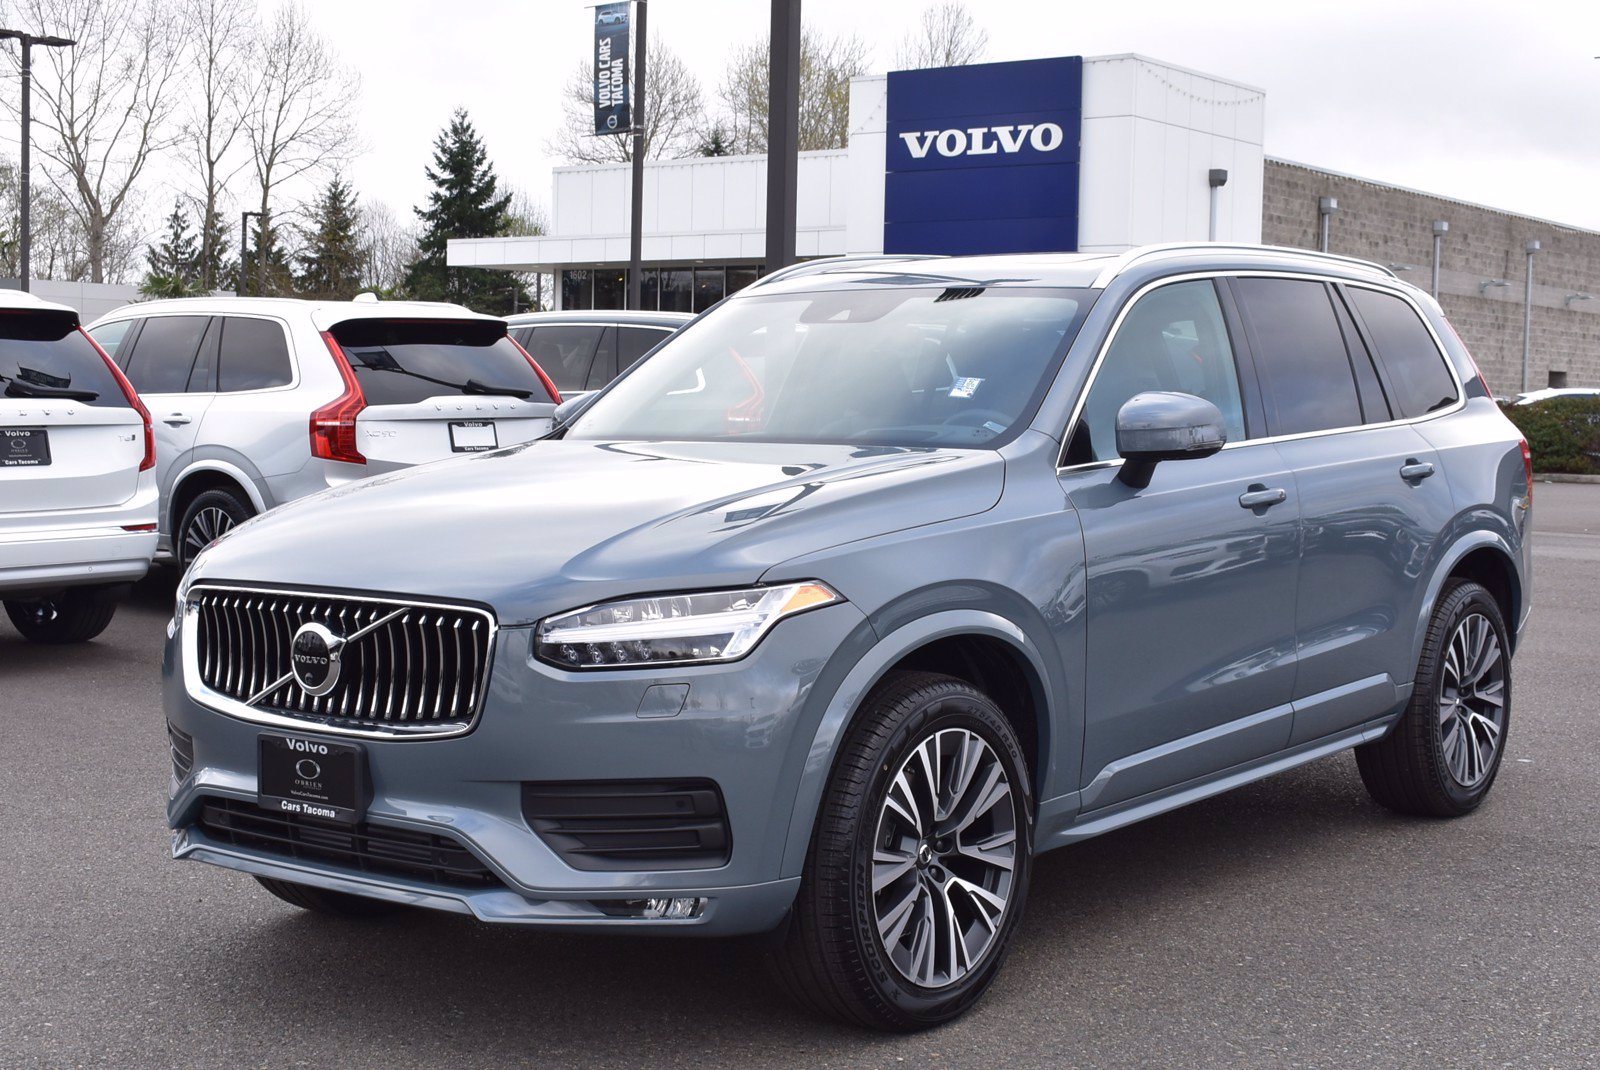 VIN: YV4A22PK9N1831657 - New 2022 Volvo XC90 For Sale at Volvo Cars Tacoma